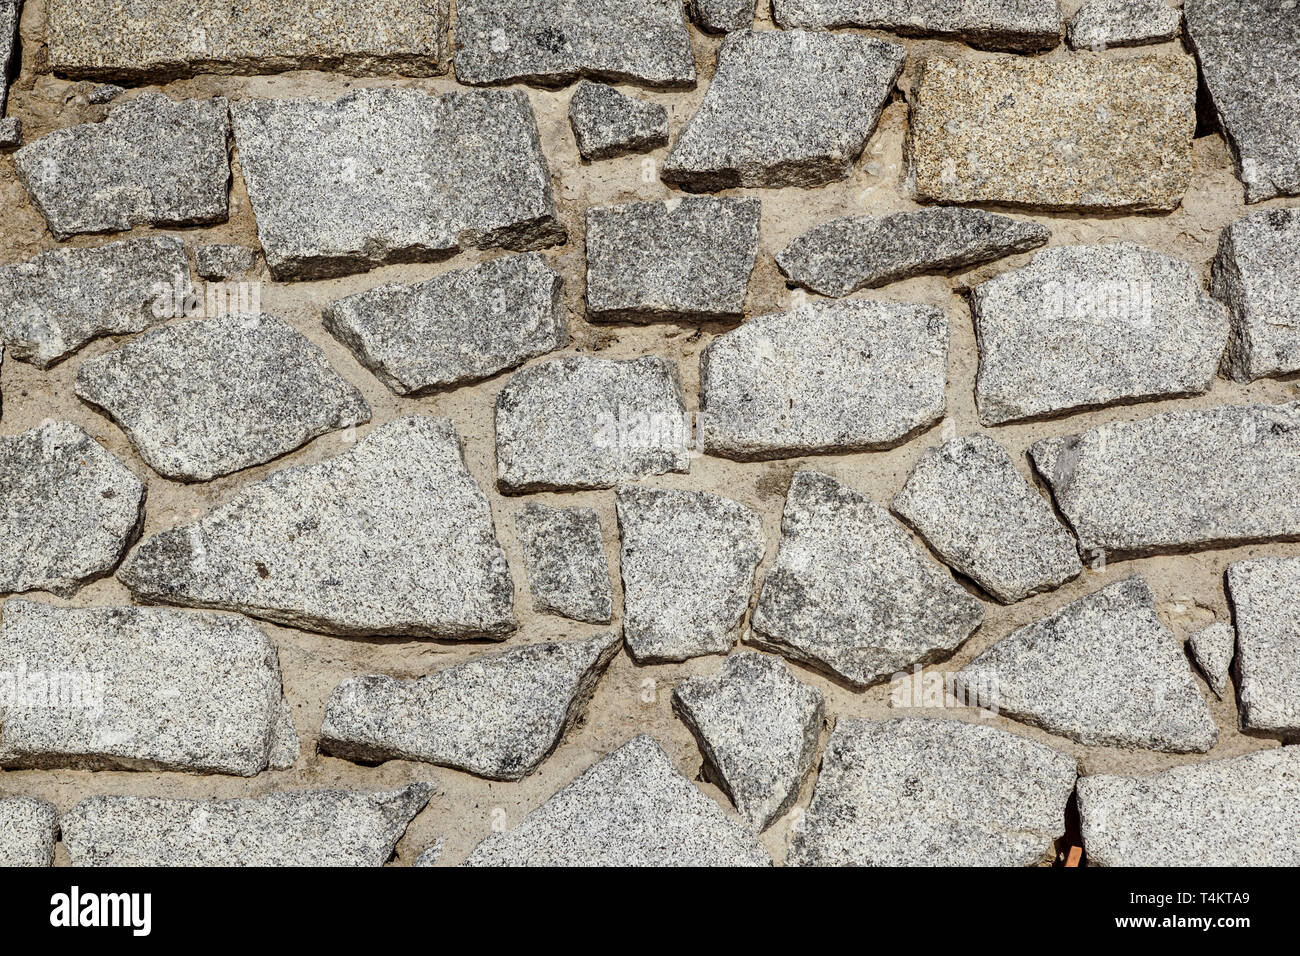 Abstract stone tile texture brick wall background. Stock Photo